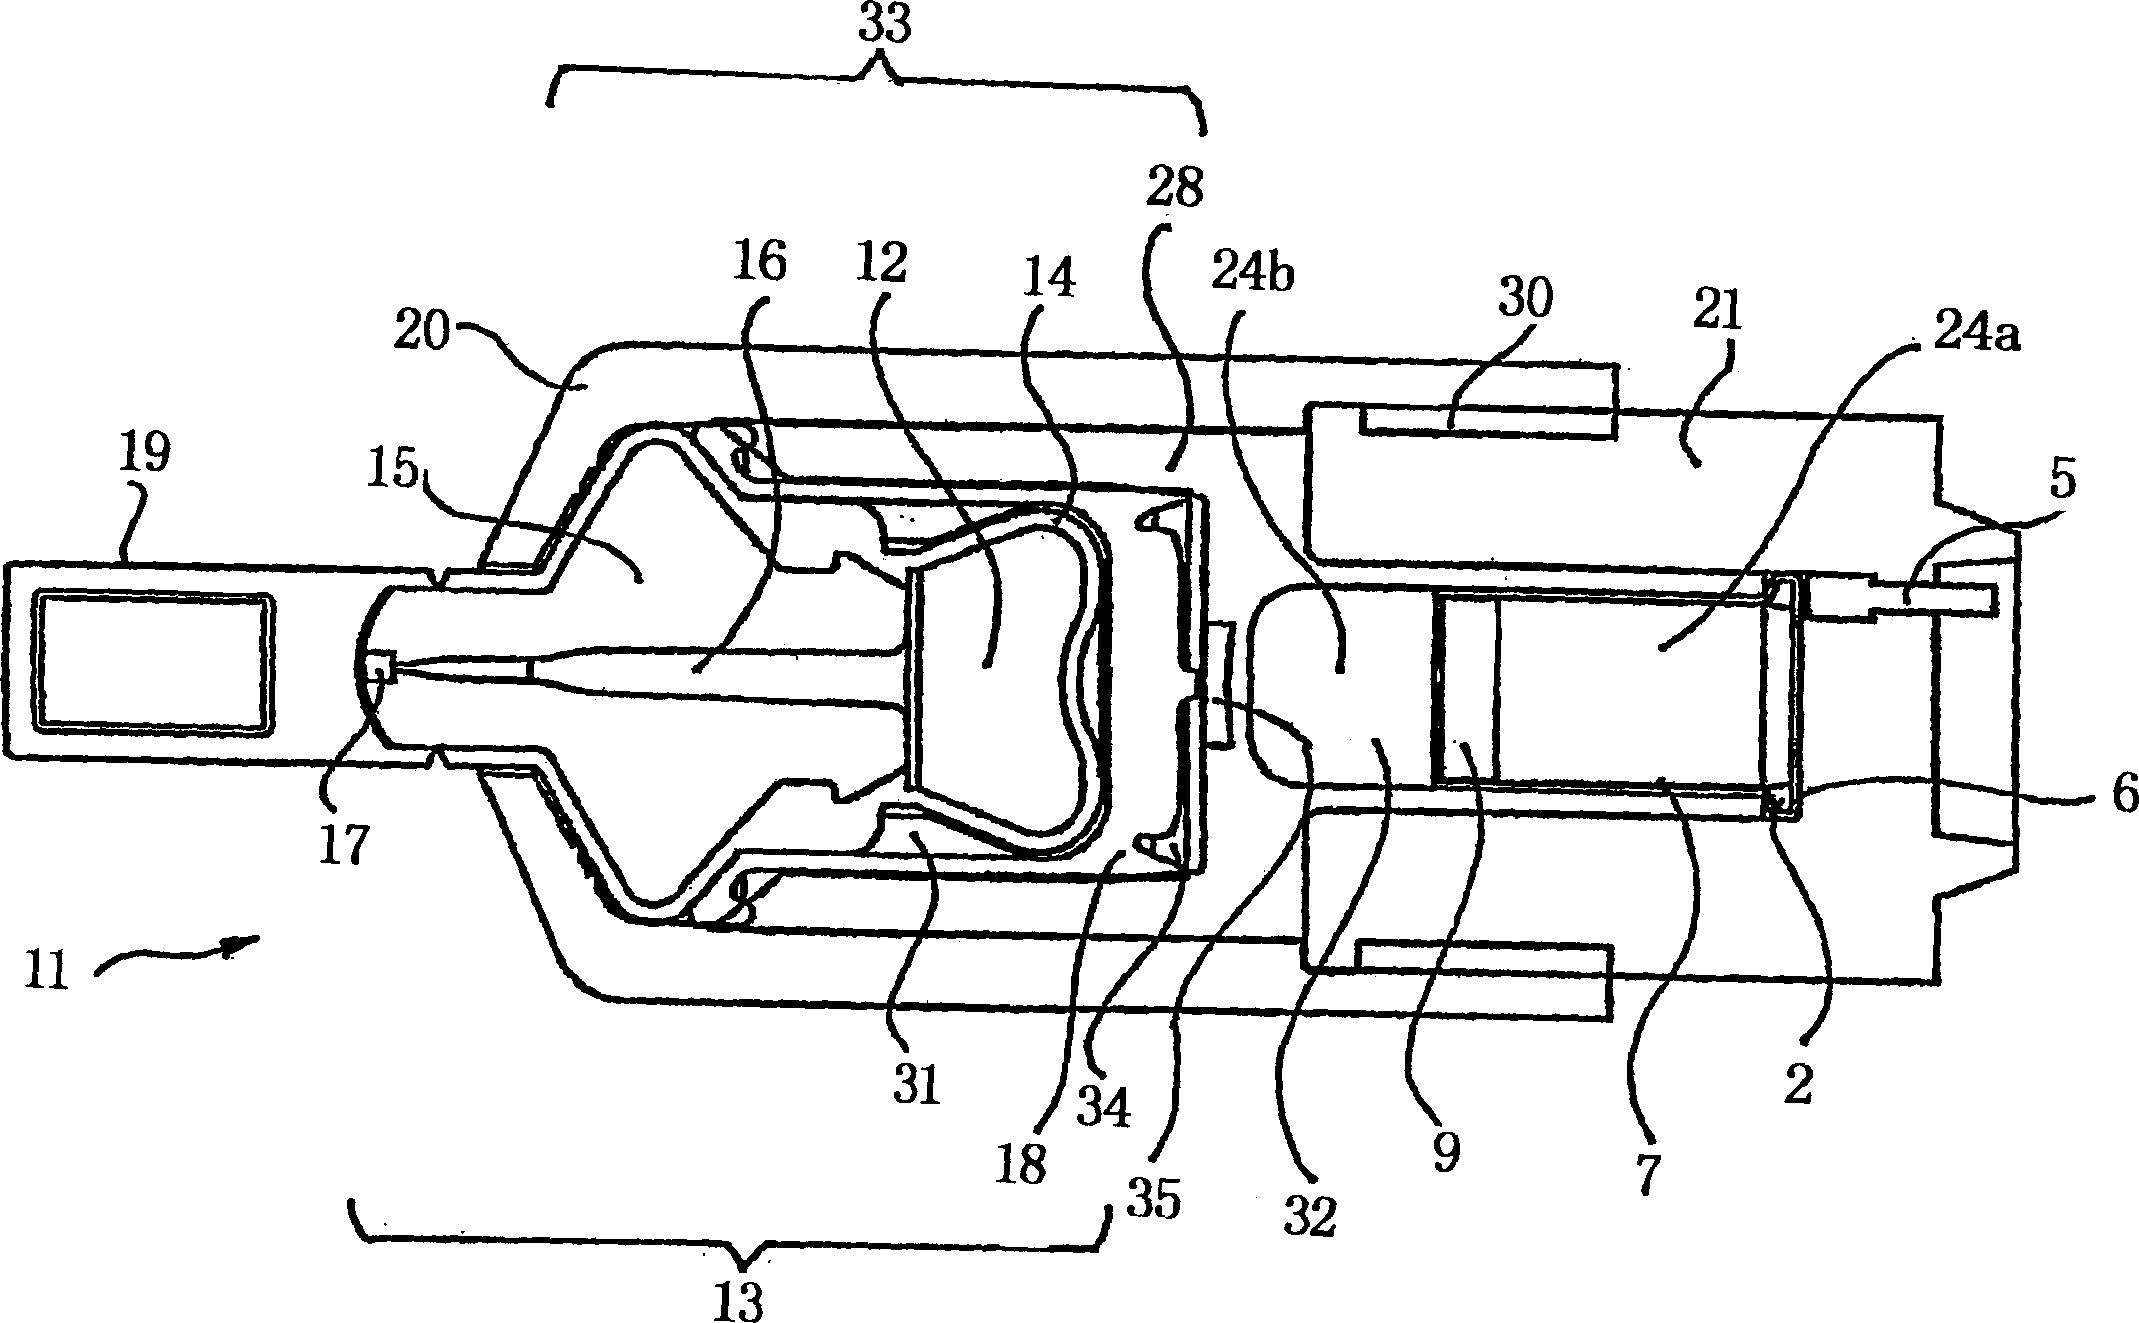 Needleless hypodermic injection device with non-electric ignition means